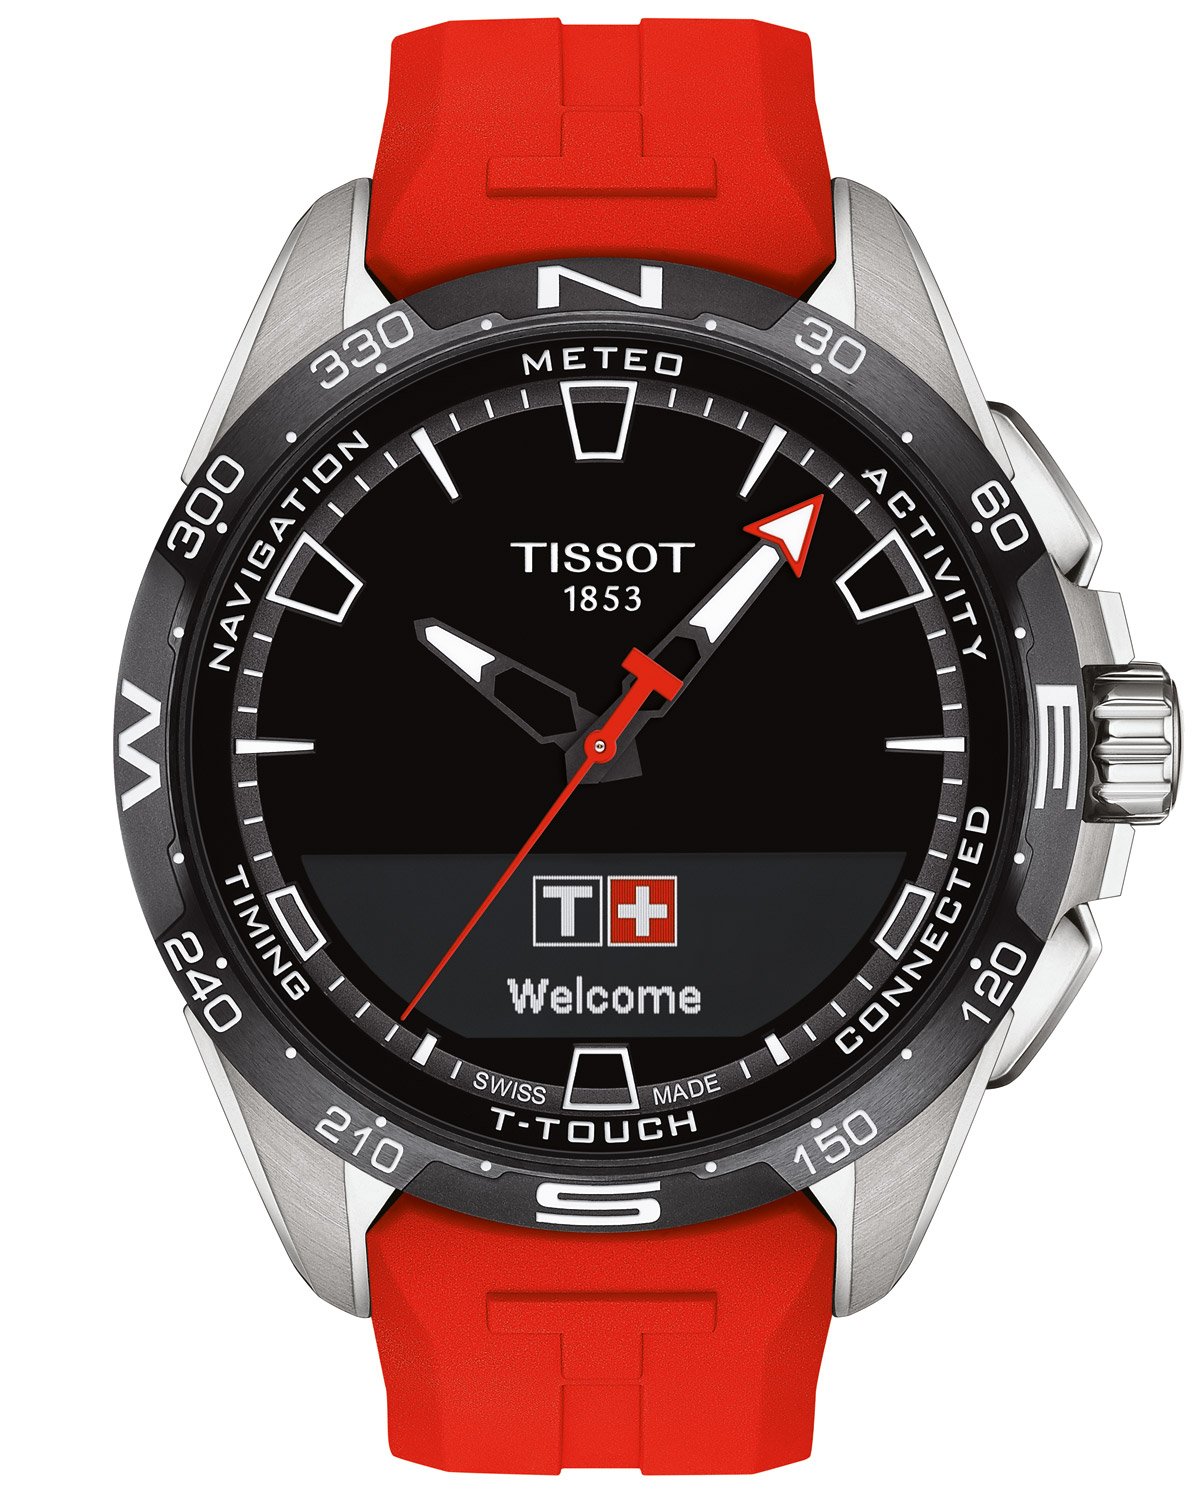 Tissot T121.420.47.051.01 Herrenuhr T-Touch Connect Solar Rot